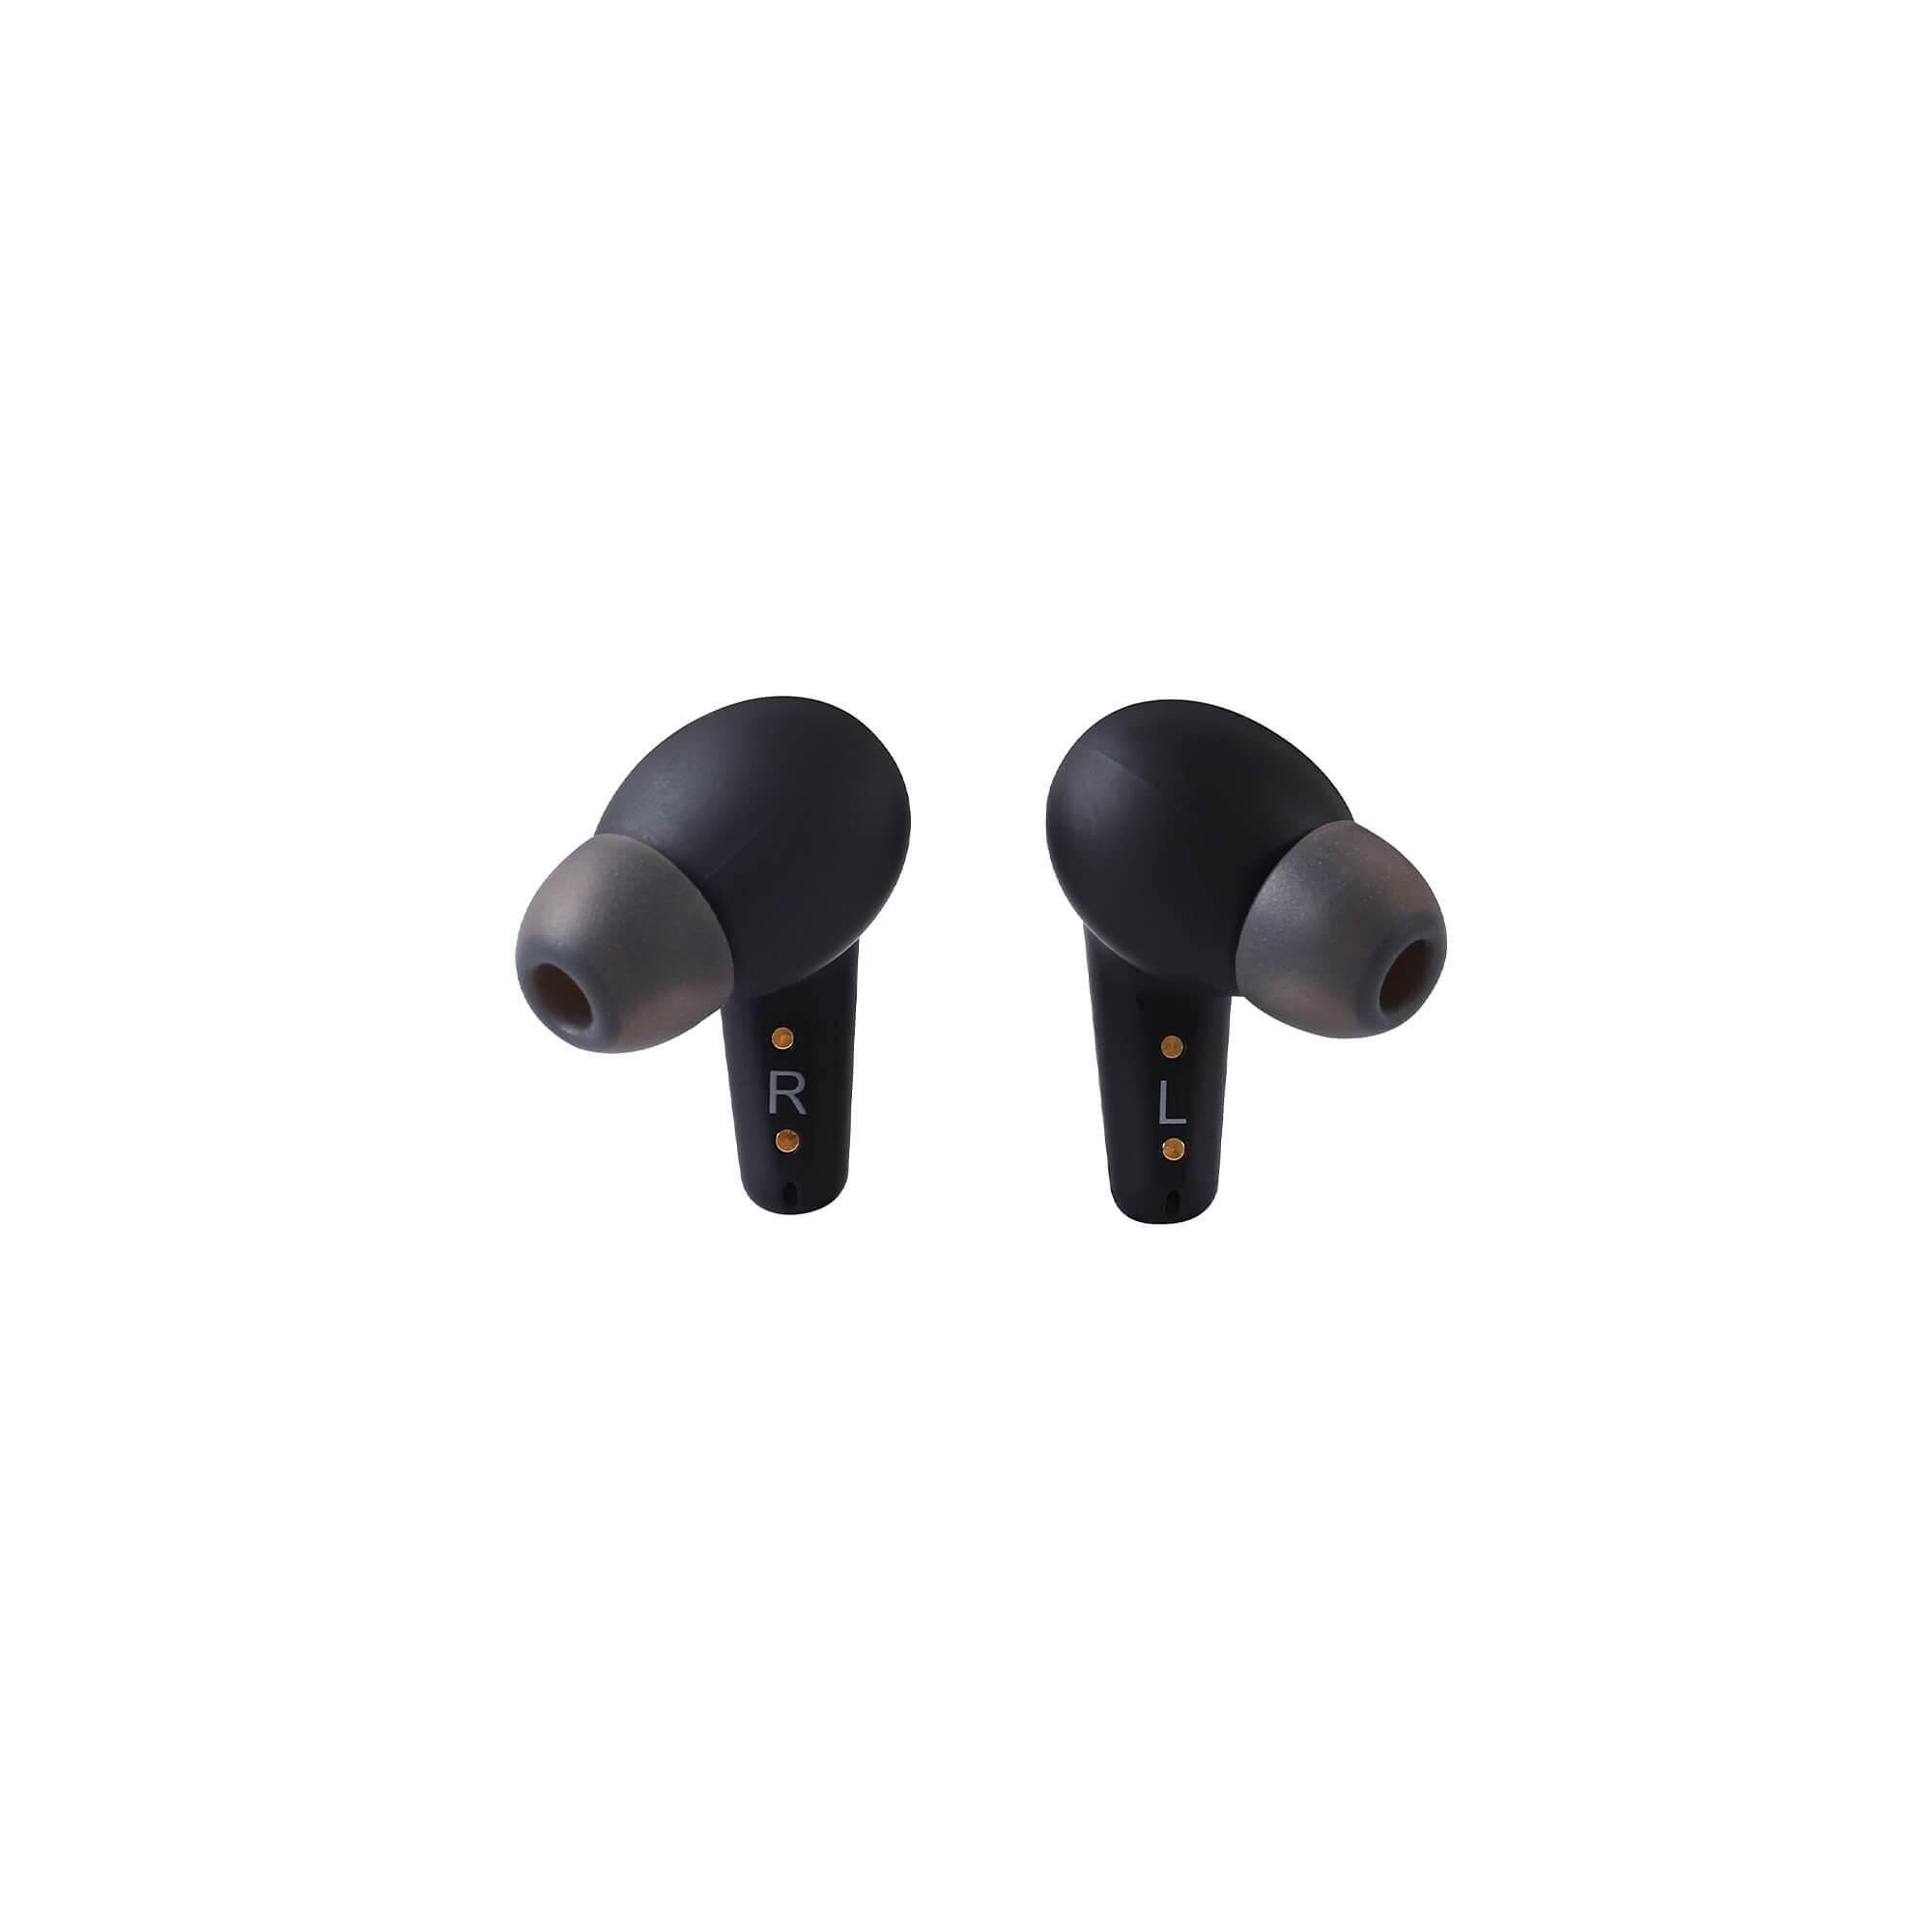 Fisdemo Seven Digital ITE Hearing Aids: Rechargeable, Bluetooth, Self-Fitting & Customizable with APP